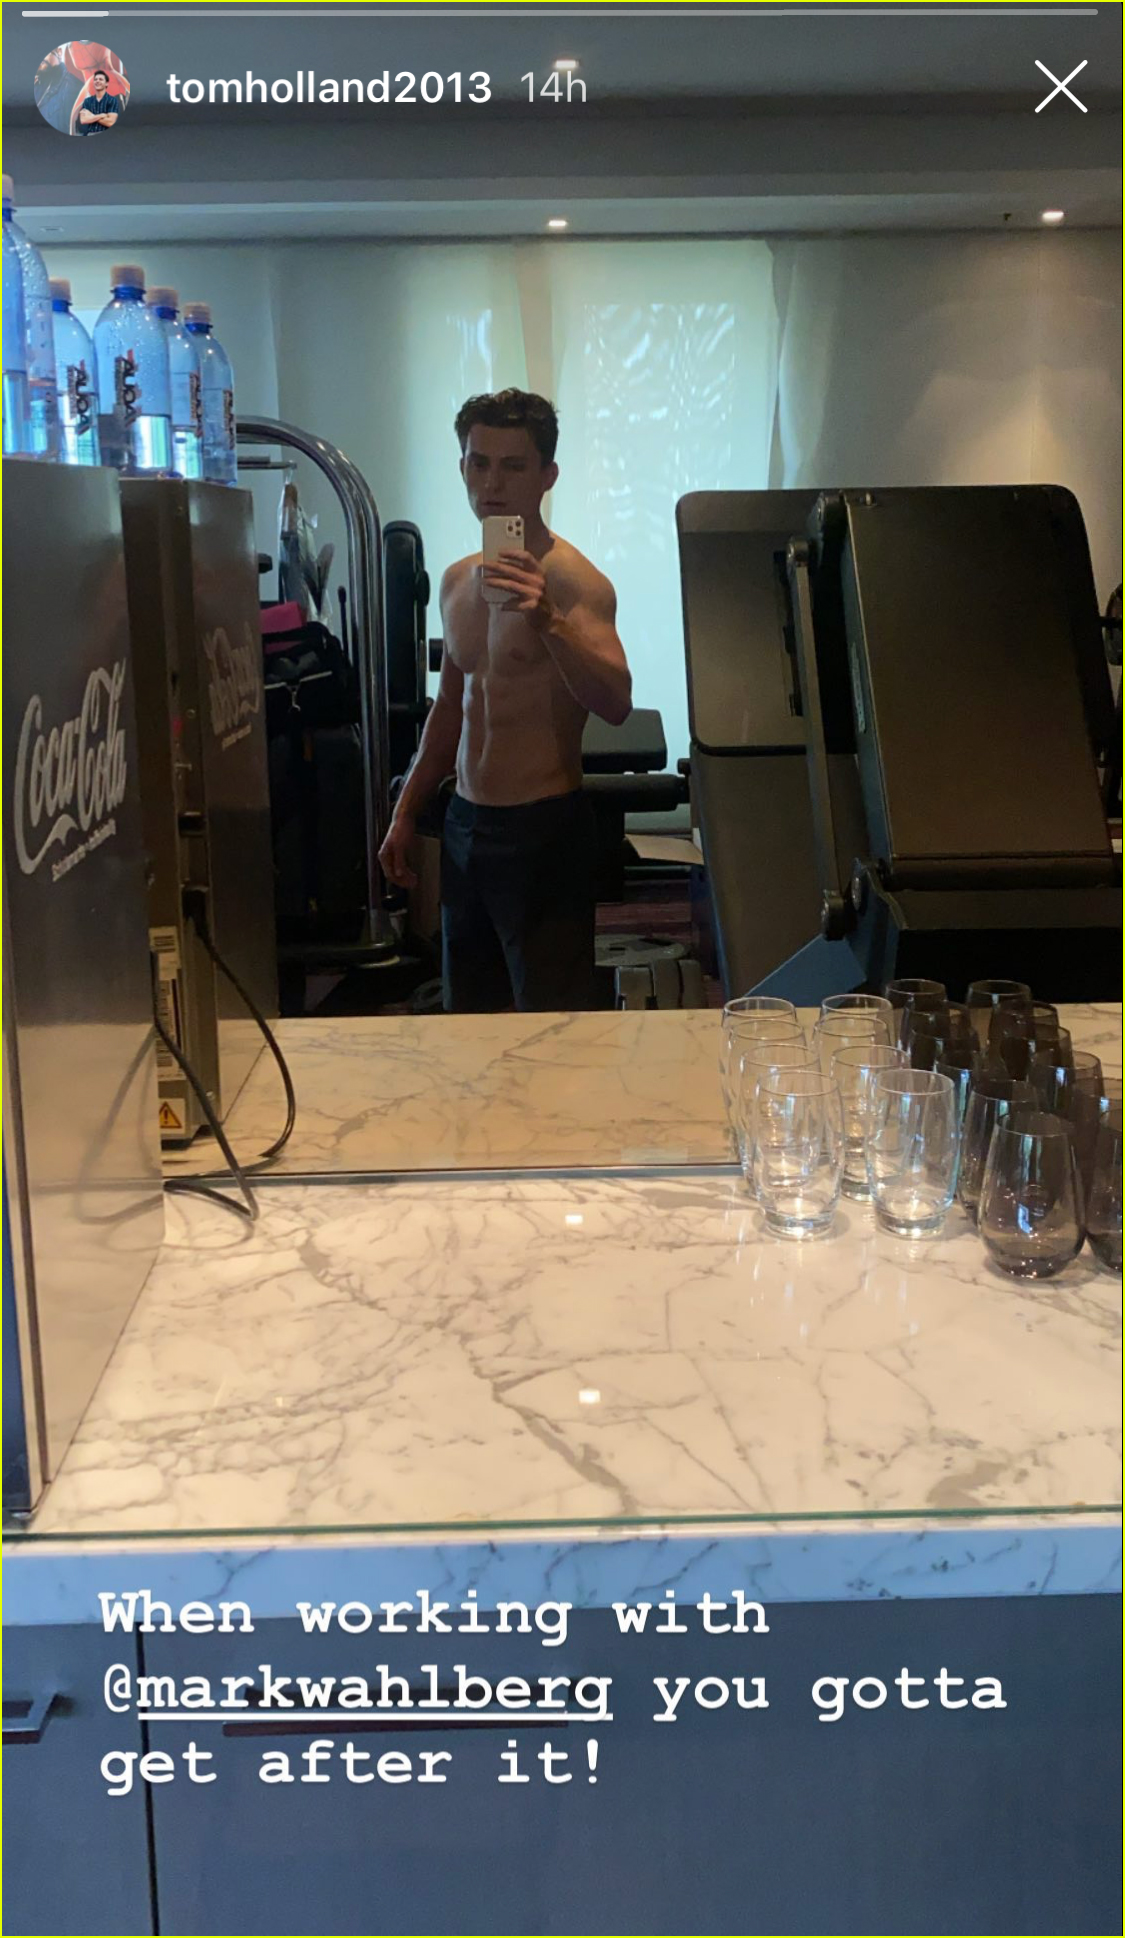 tom holland looks ripped in new shirtless pic